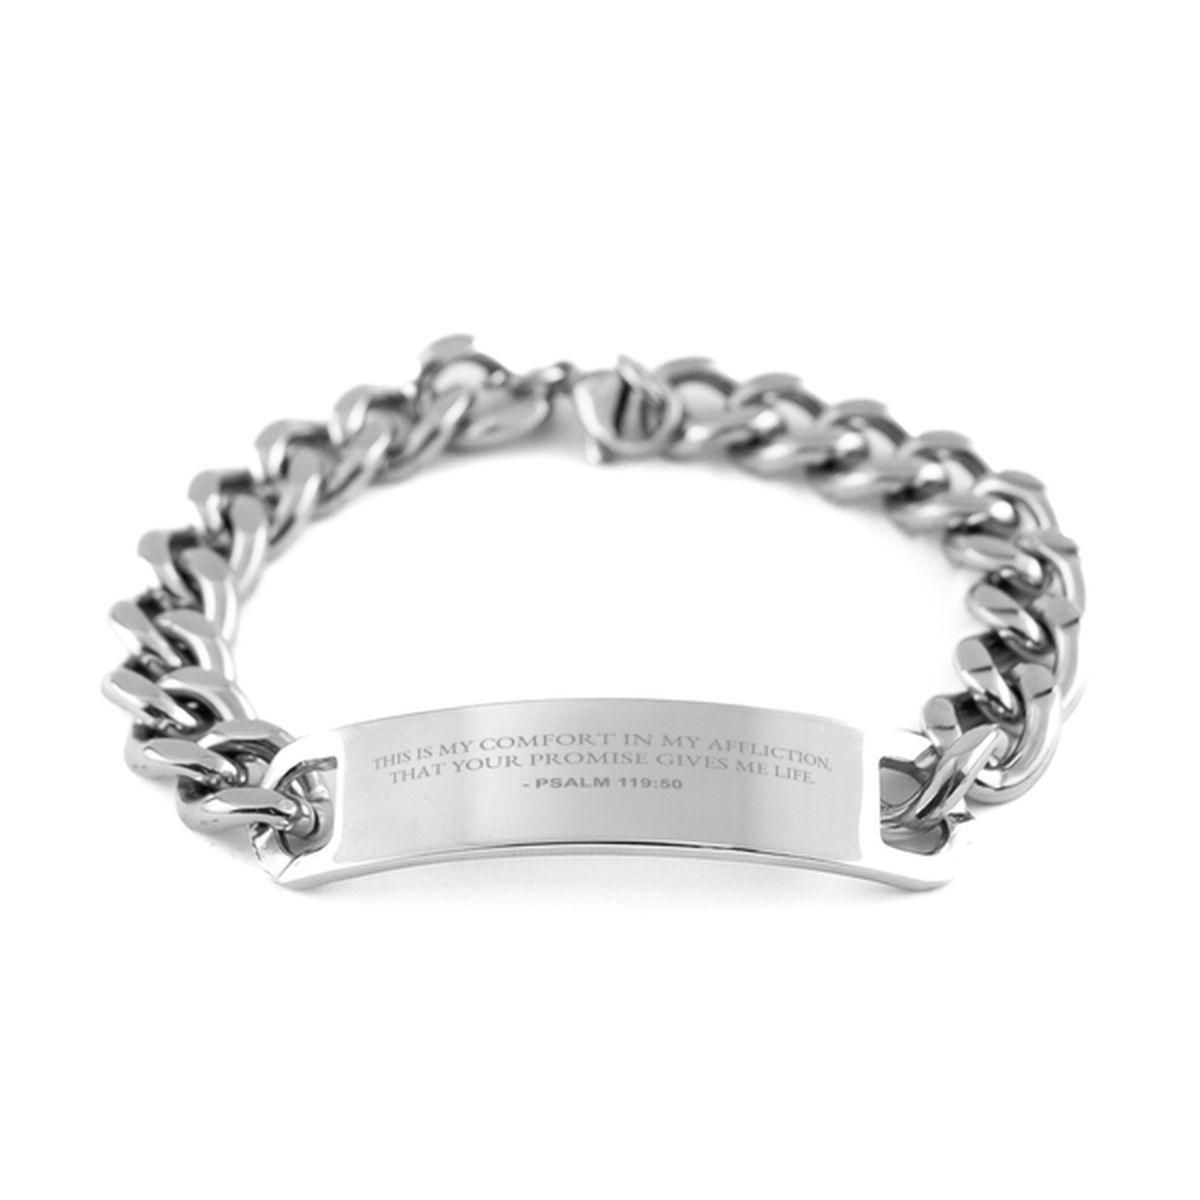 Bible Verse Chain Stainless Steel Bracelet, Psalm 119:50 This Is My Comfort In My Affliction, That Your, Inspirational Christian Gifts For Men Women